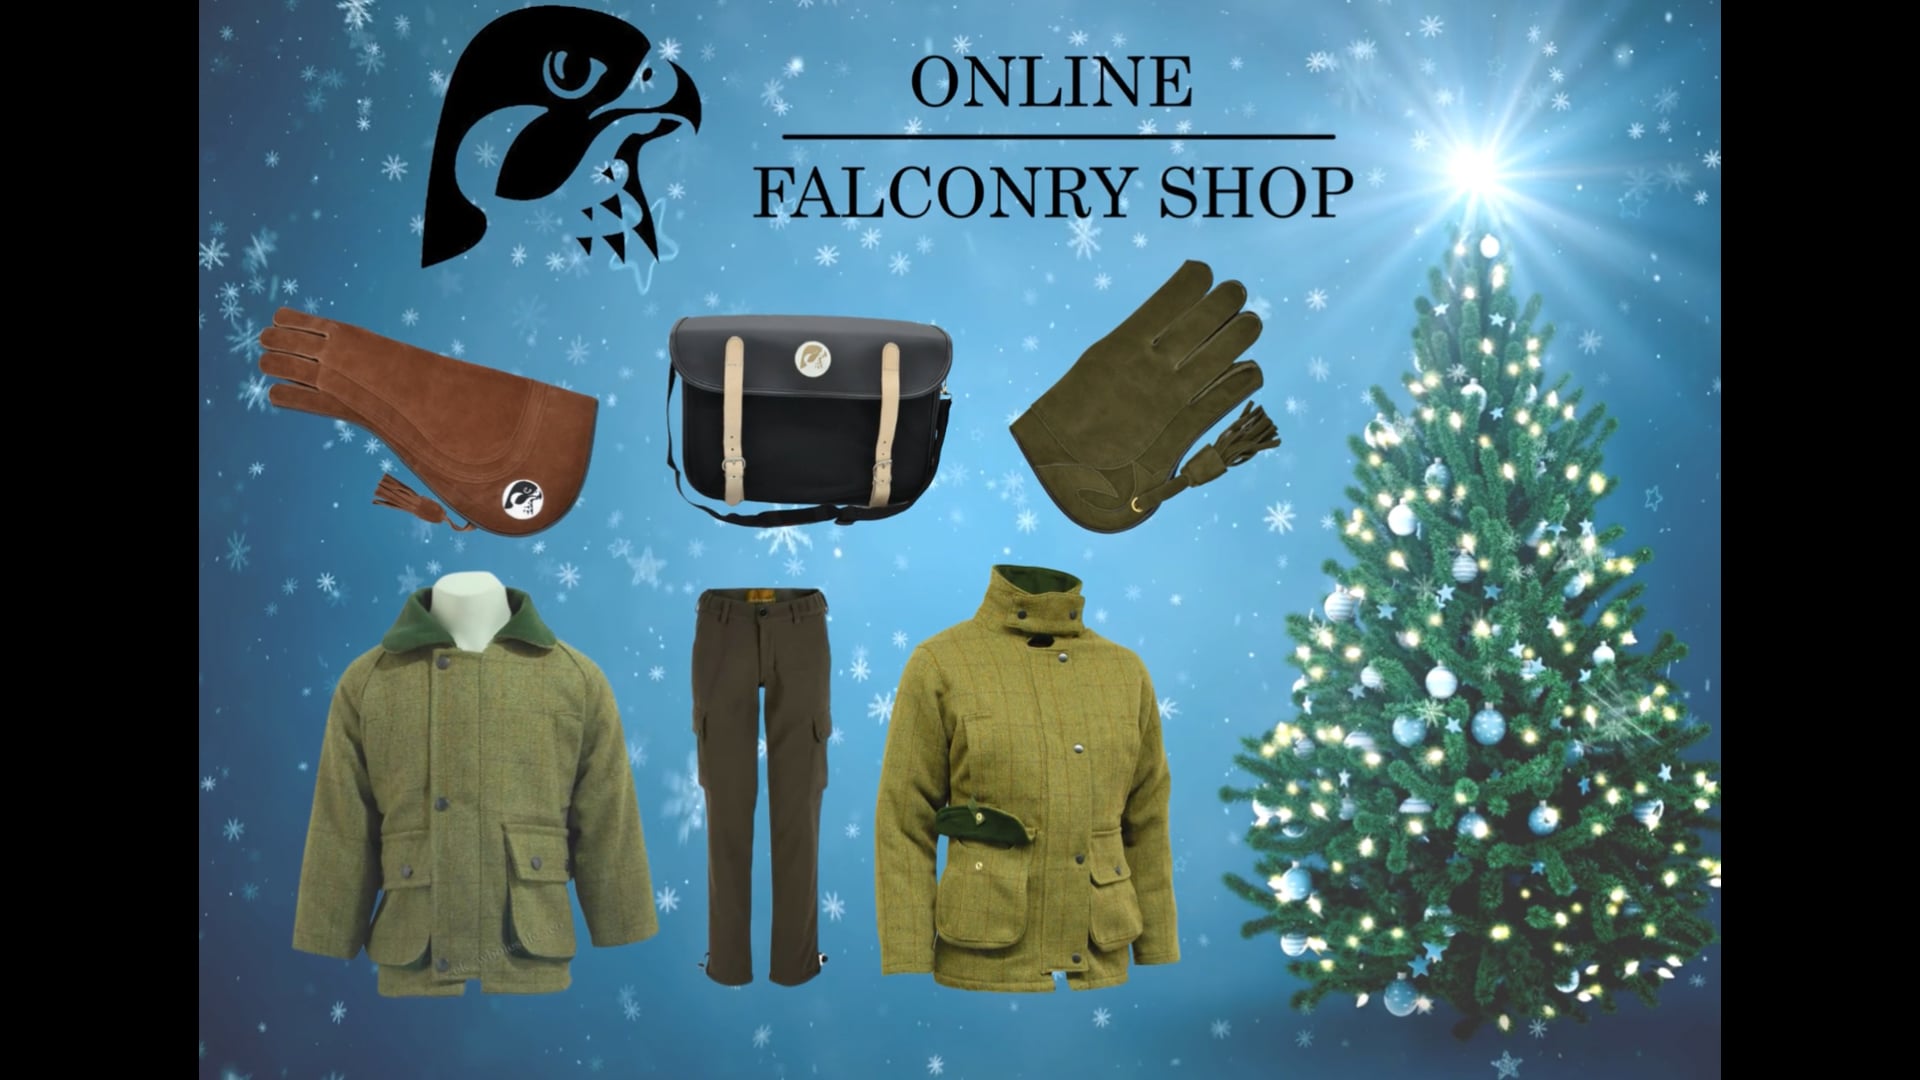 Online Falconry Shop